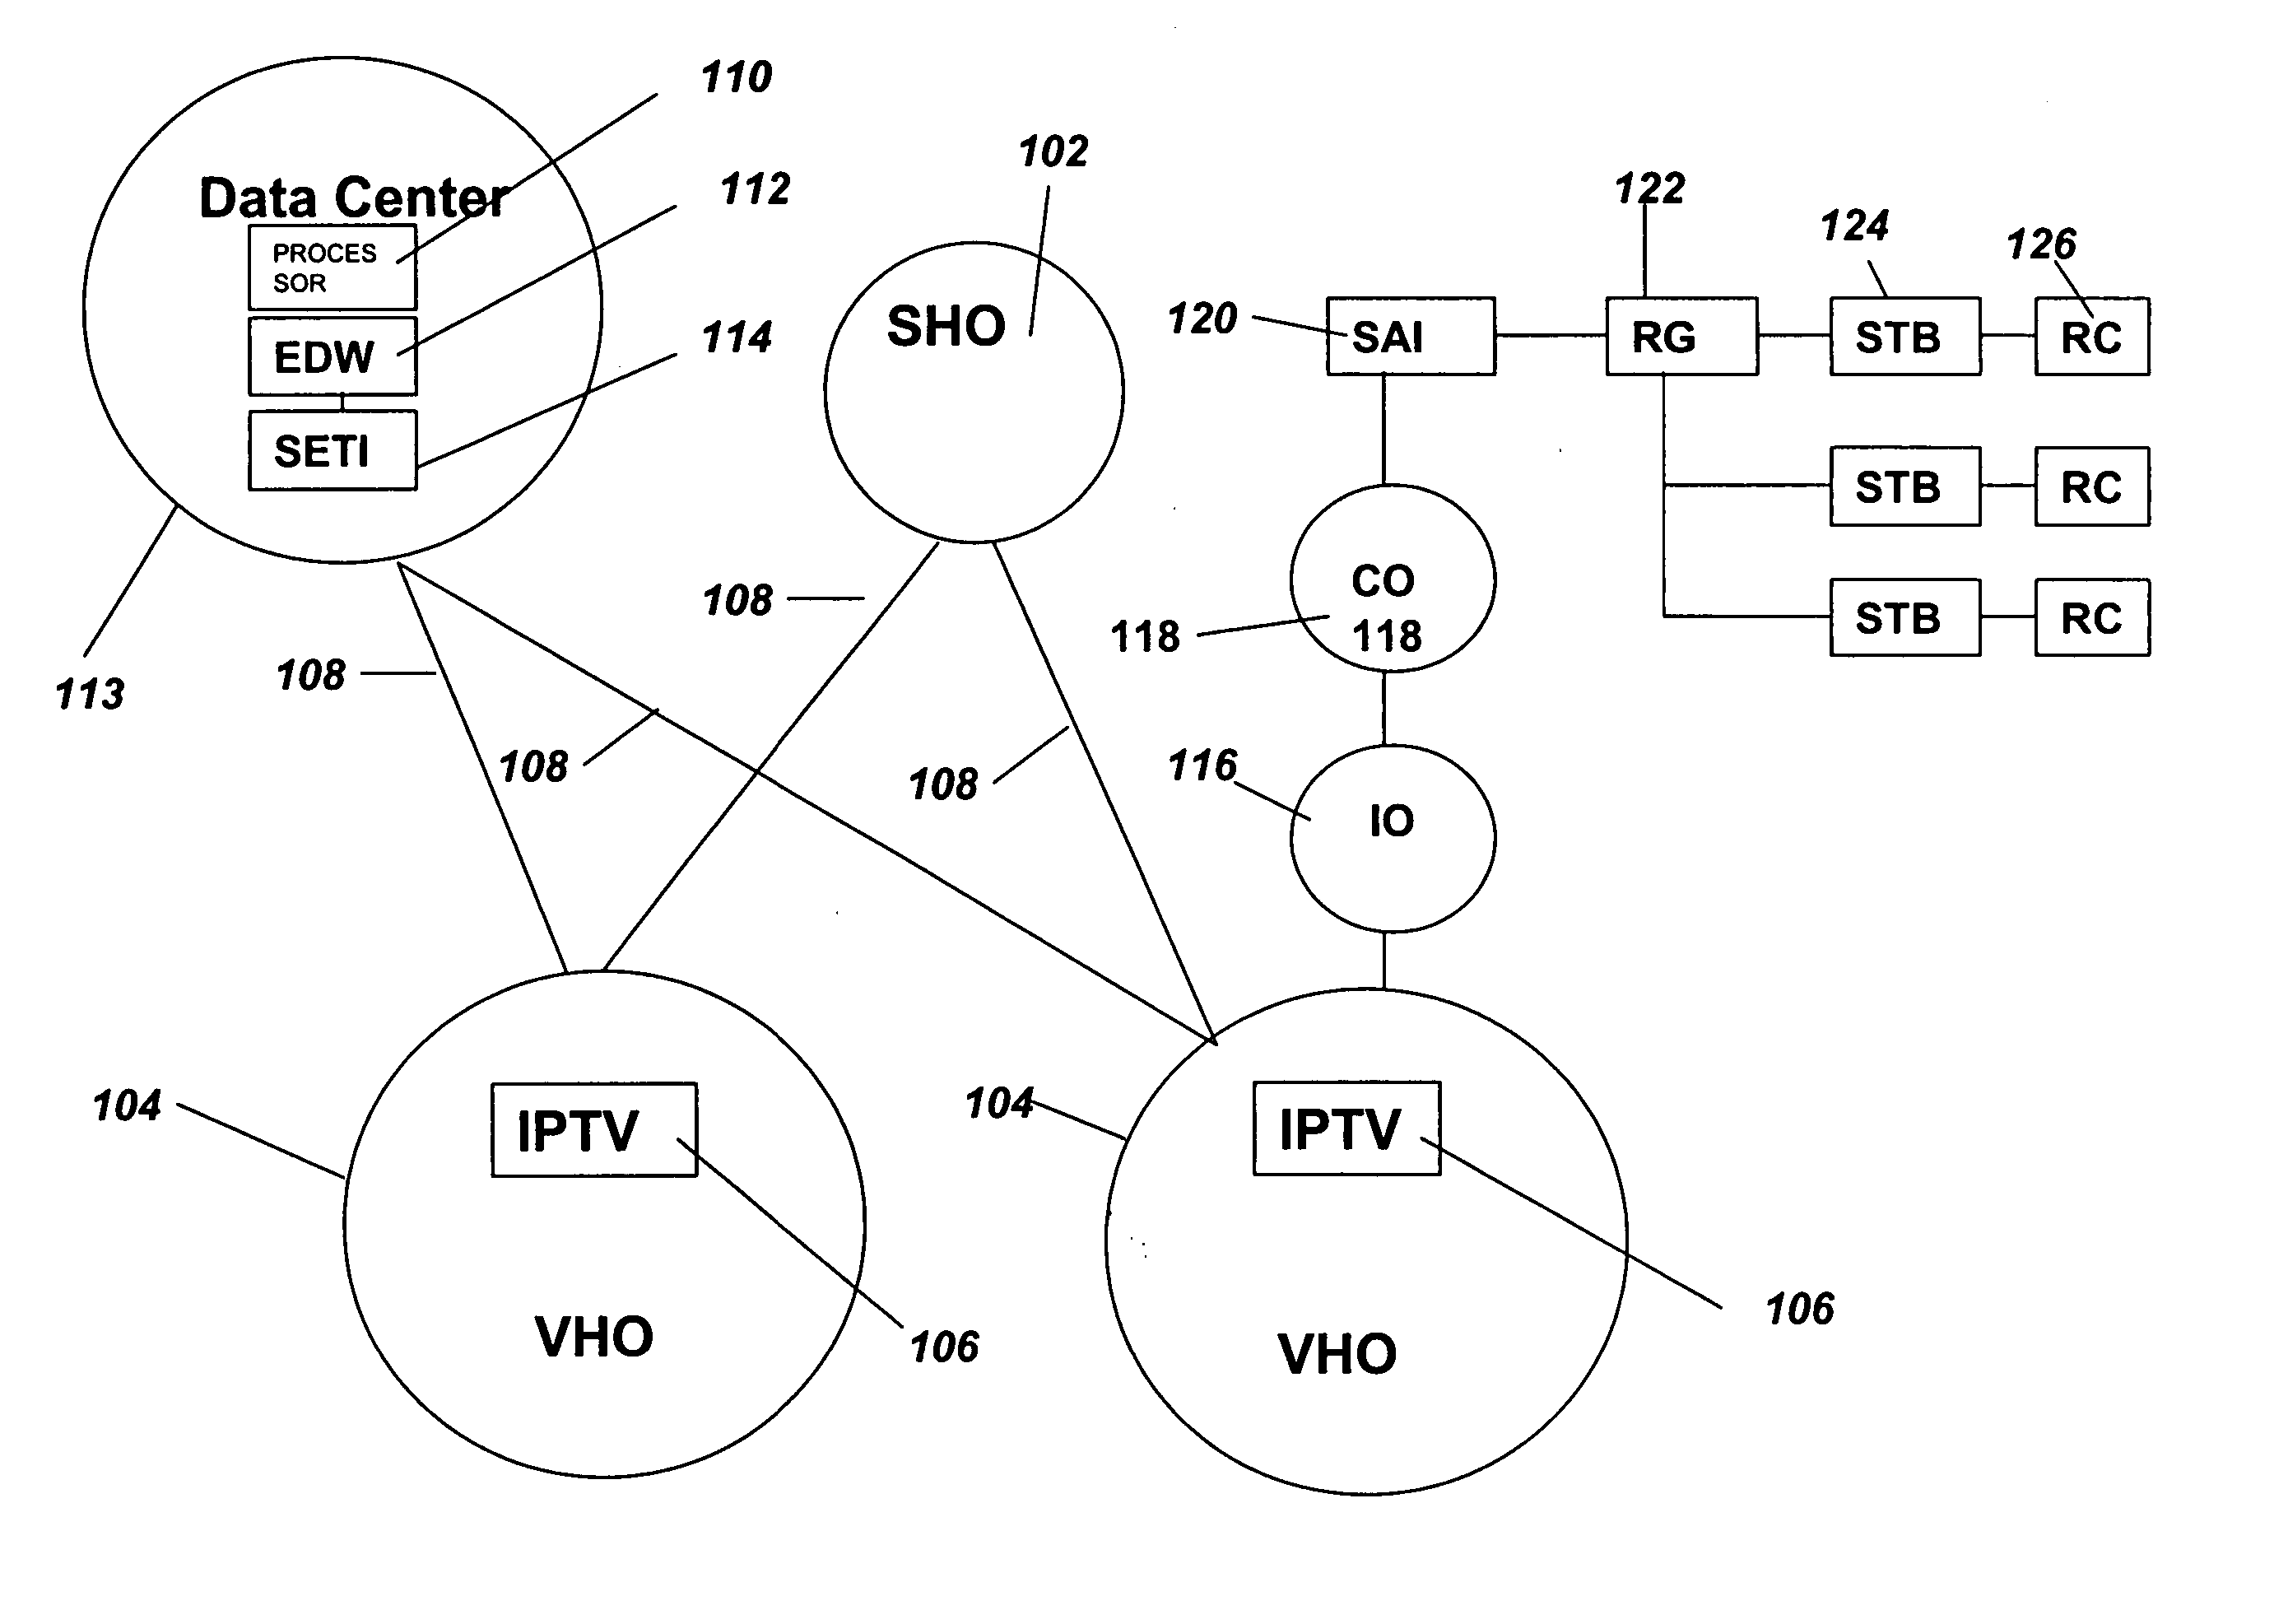 Data collection and analysis for internet protocol television subscriber activity